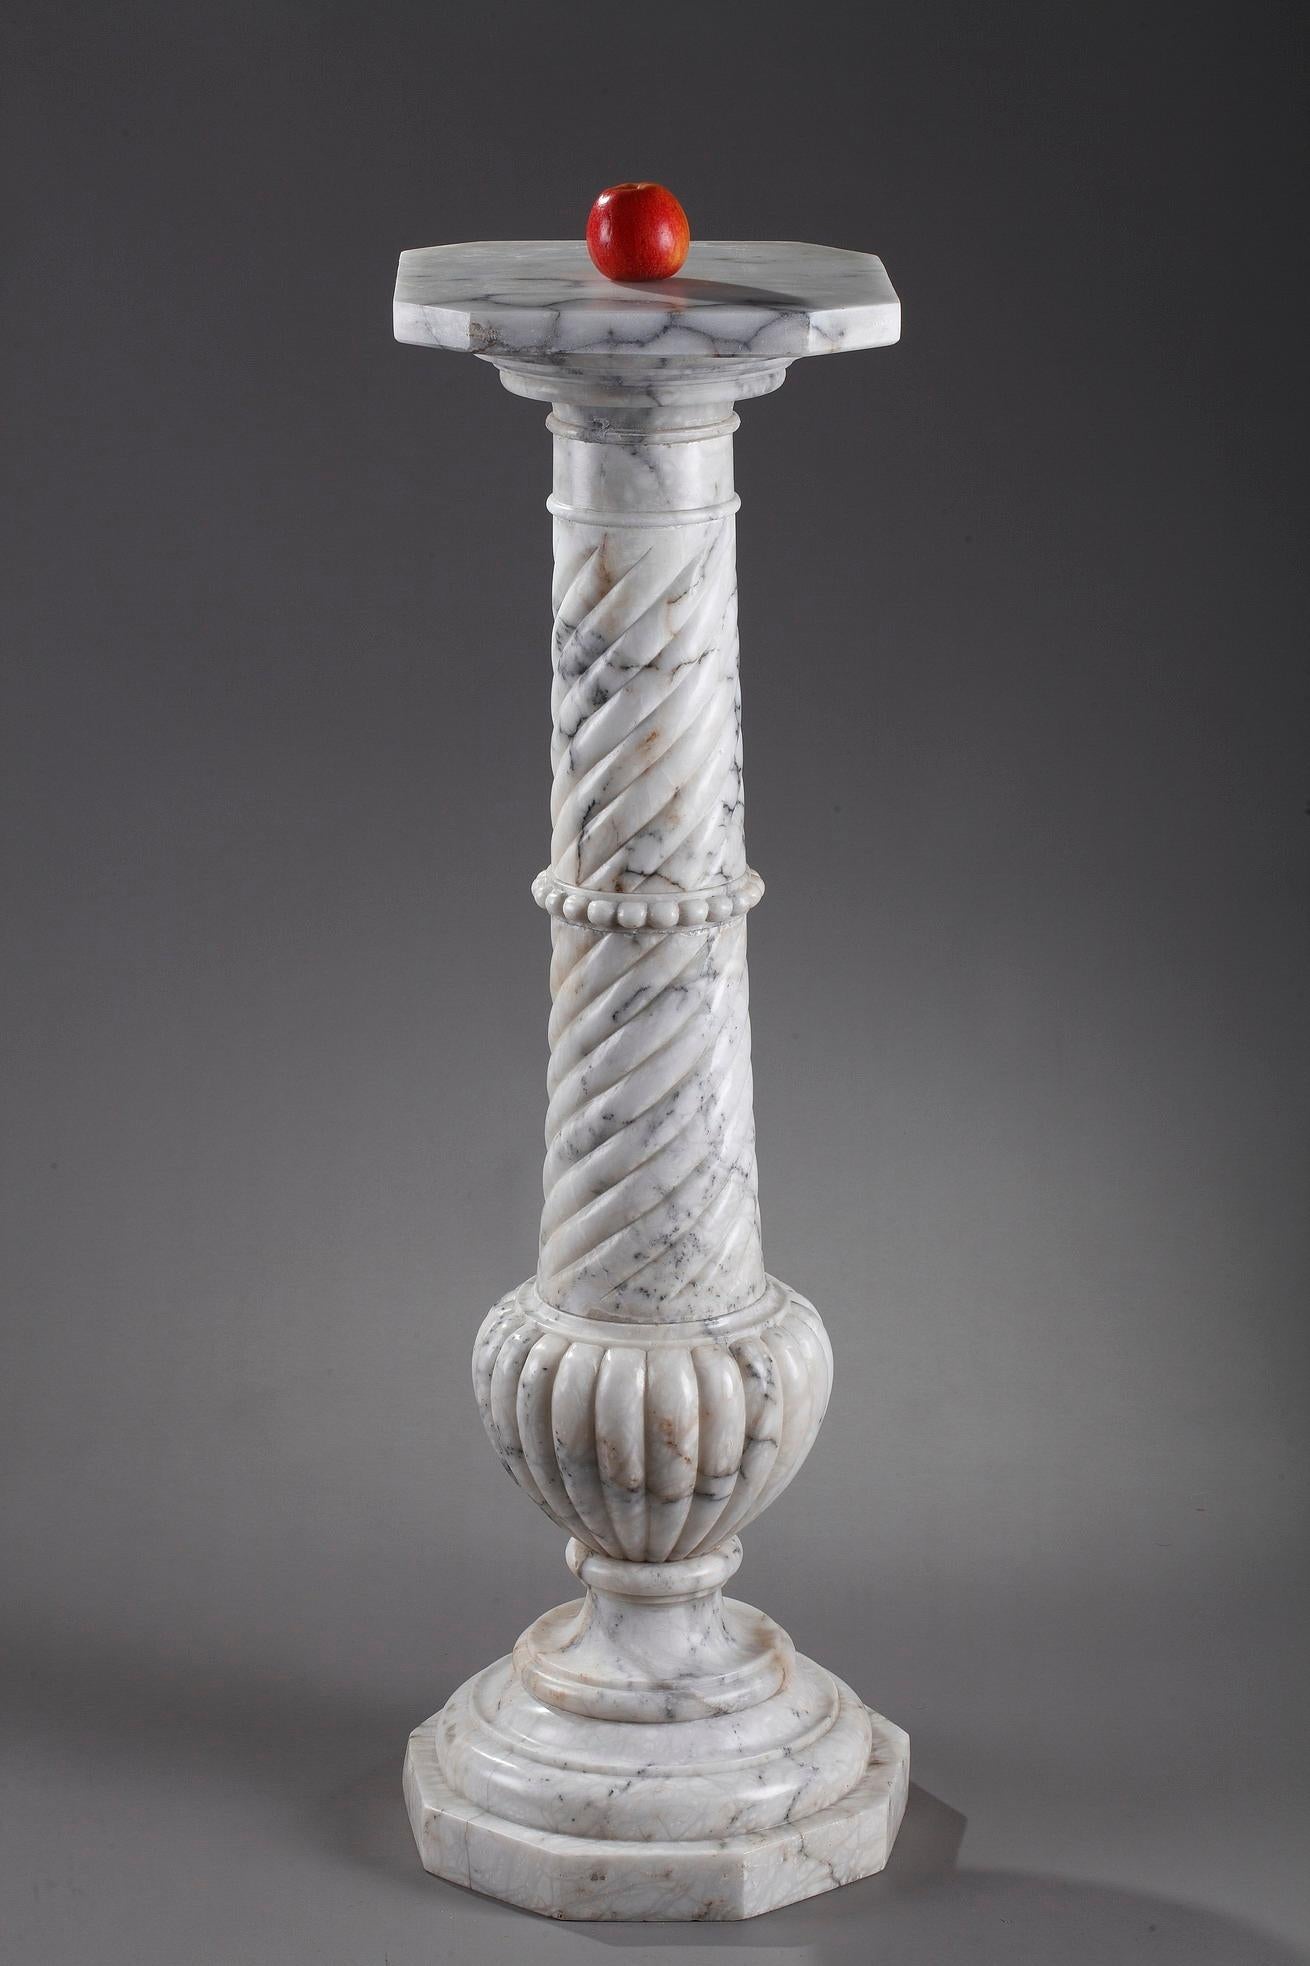 Large spiraling column pedestal stand with Doric capital. The pedestal is crafted in richly veined white marble with a rotating display plate. The marble pedestal is decorated with a frieze of pearls and rests on a base with multiple terraced,